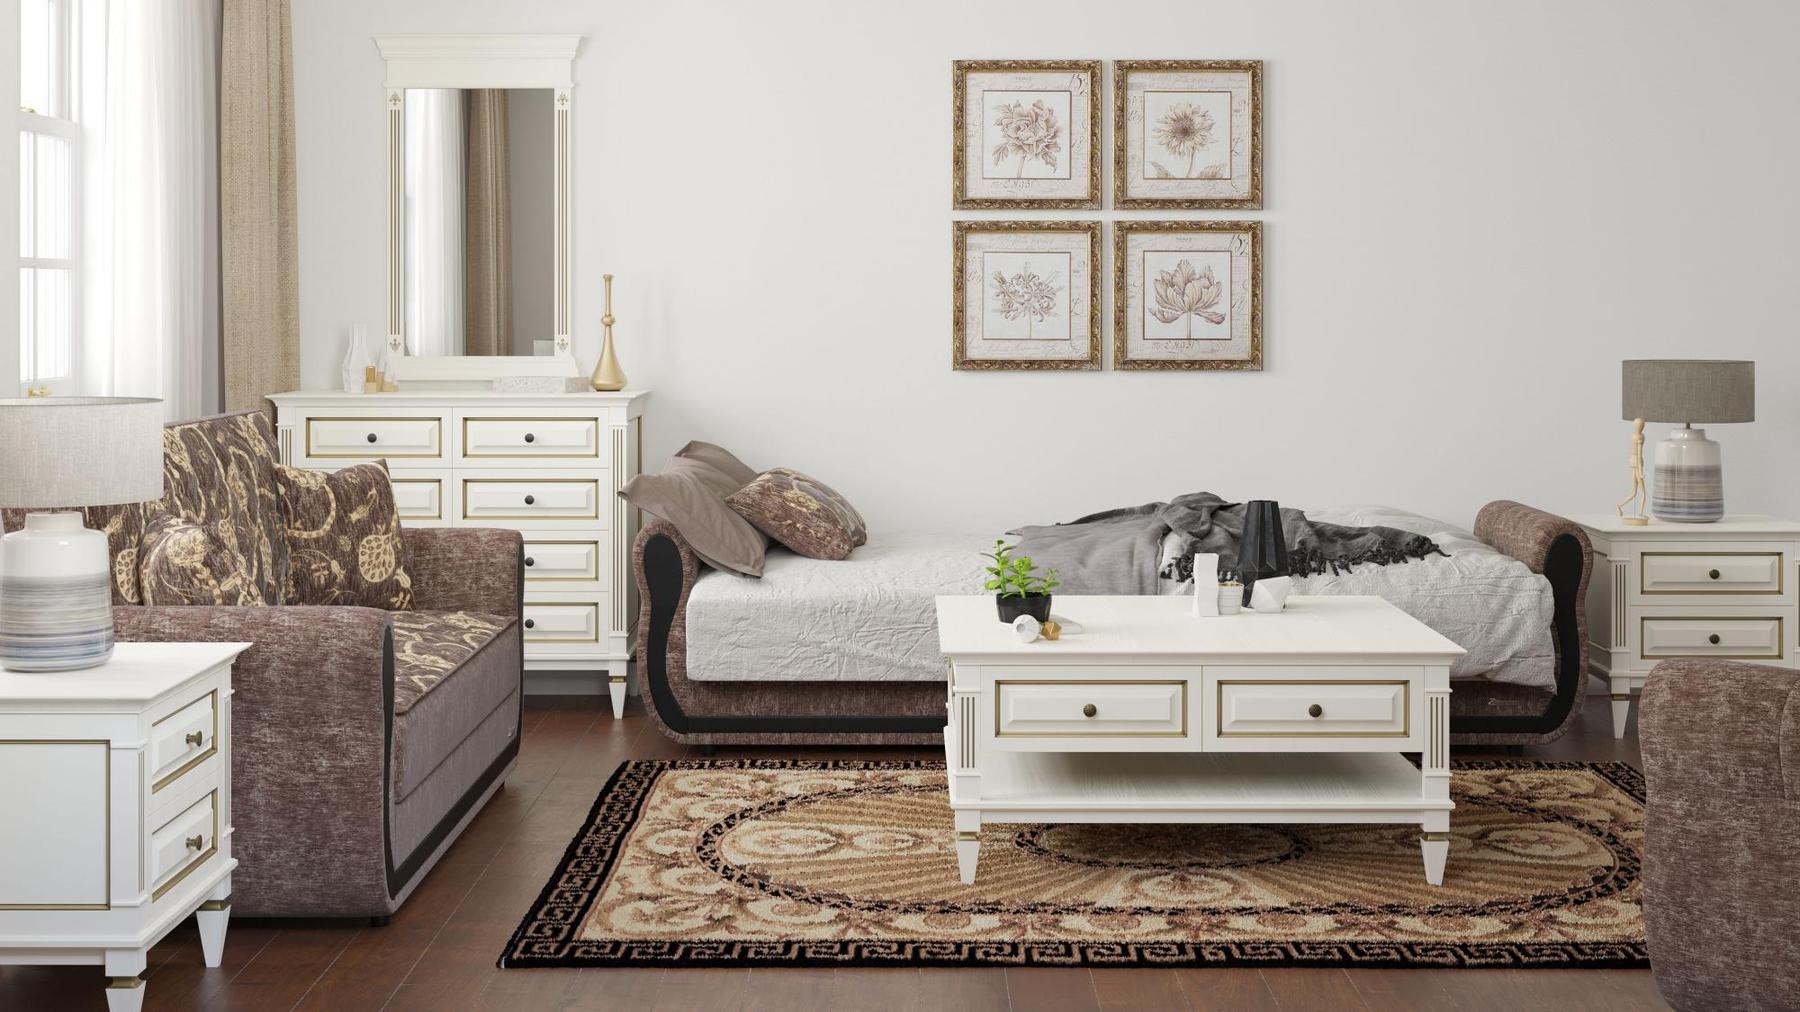 Modern design, Silver , Chenille  upholstered convertible sleeper Sofabed with underseat storage from Victoria Urban by Ottomanson in living room lifestyle setting converted to sleeper. This Sofabed measures 90 inches width by 28 inches depth by 38 inches height.